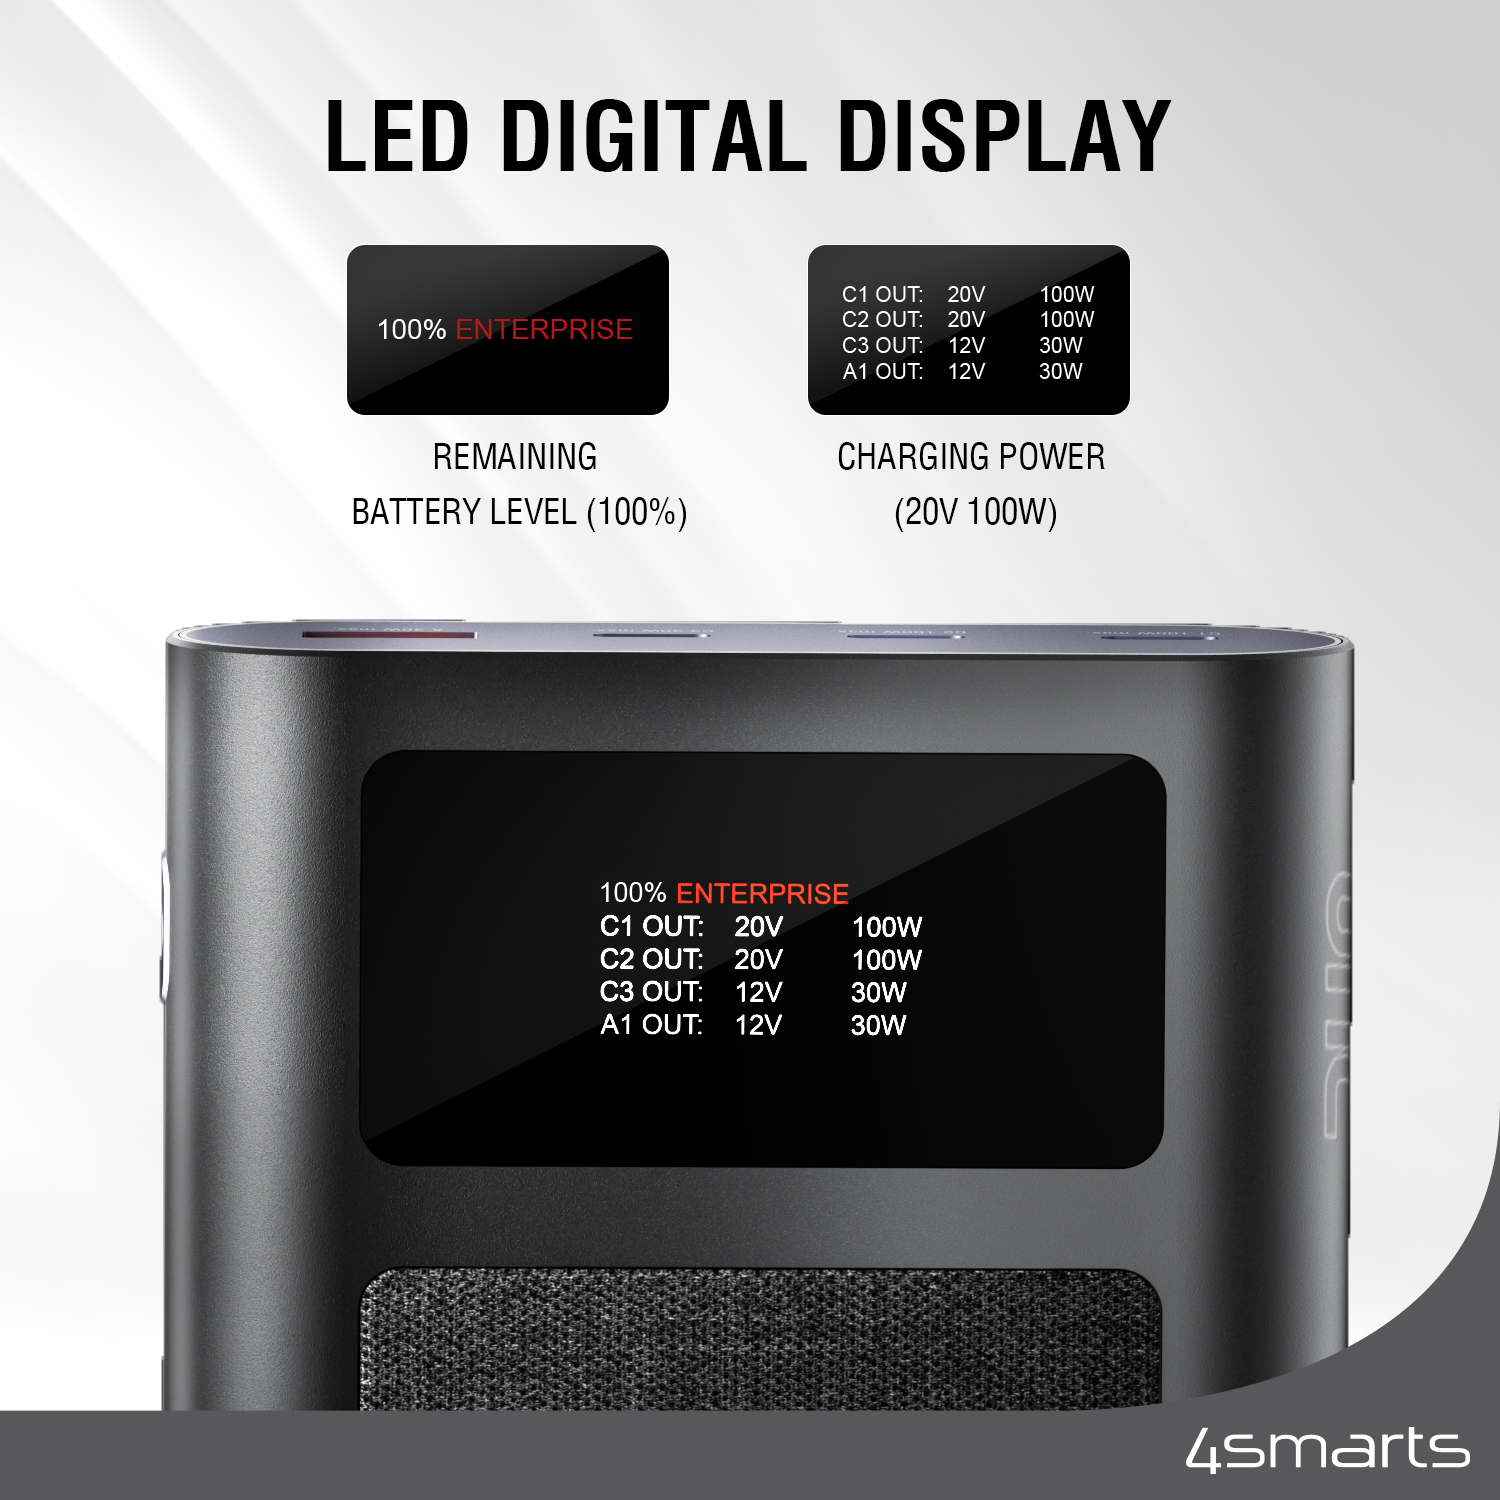 The 4smarts Enterprise Ultra Powerbank with 26800mAh has an integrated digital LED display to show the remaining battery charge and the charging current.